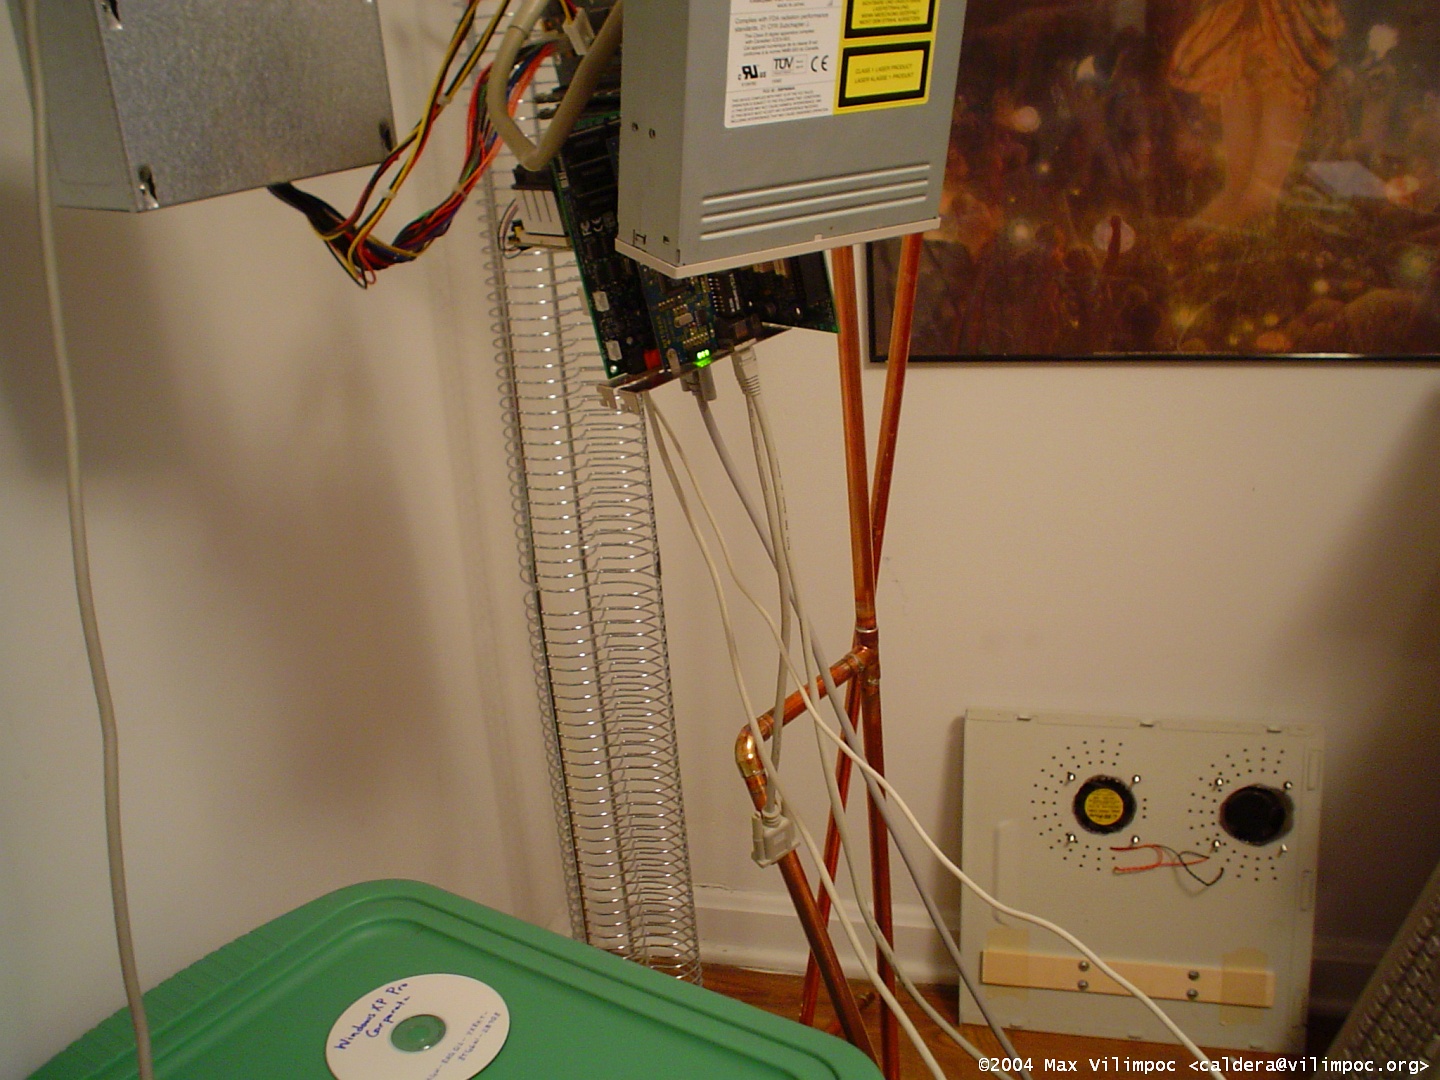 A close up view of the hanging computer's CD-ROM drive